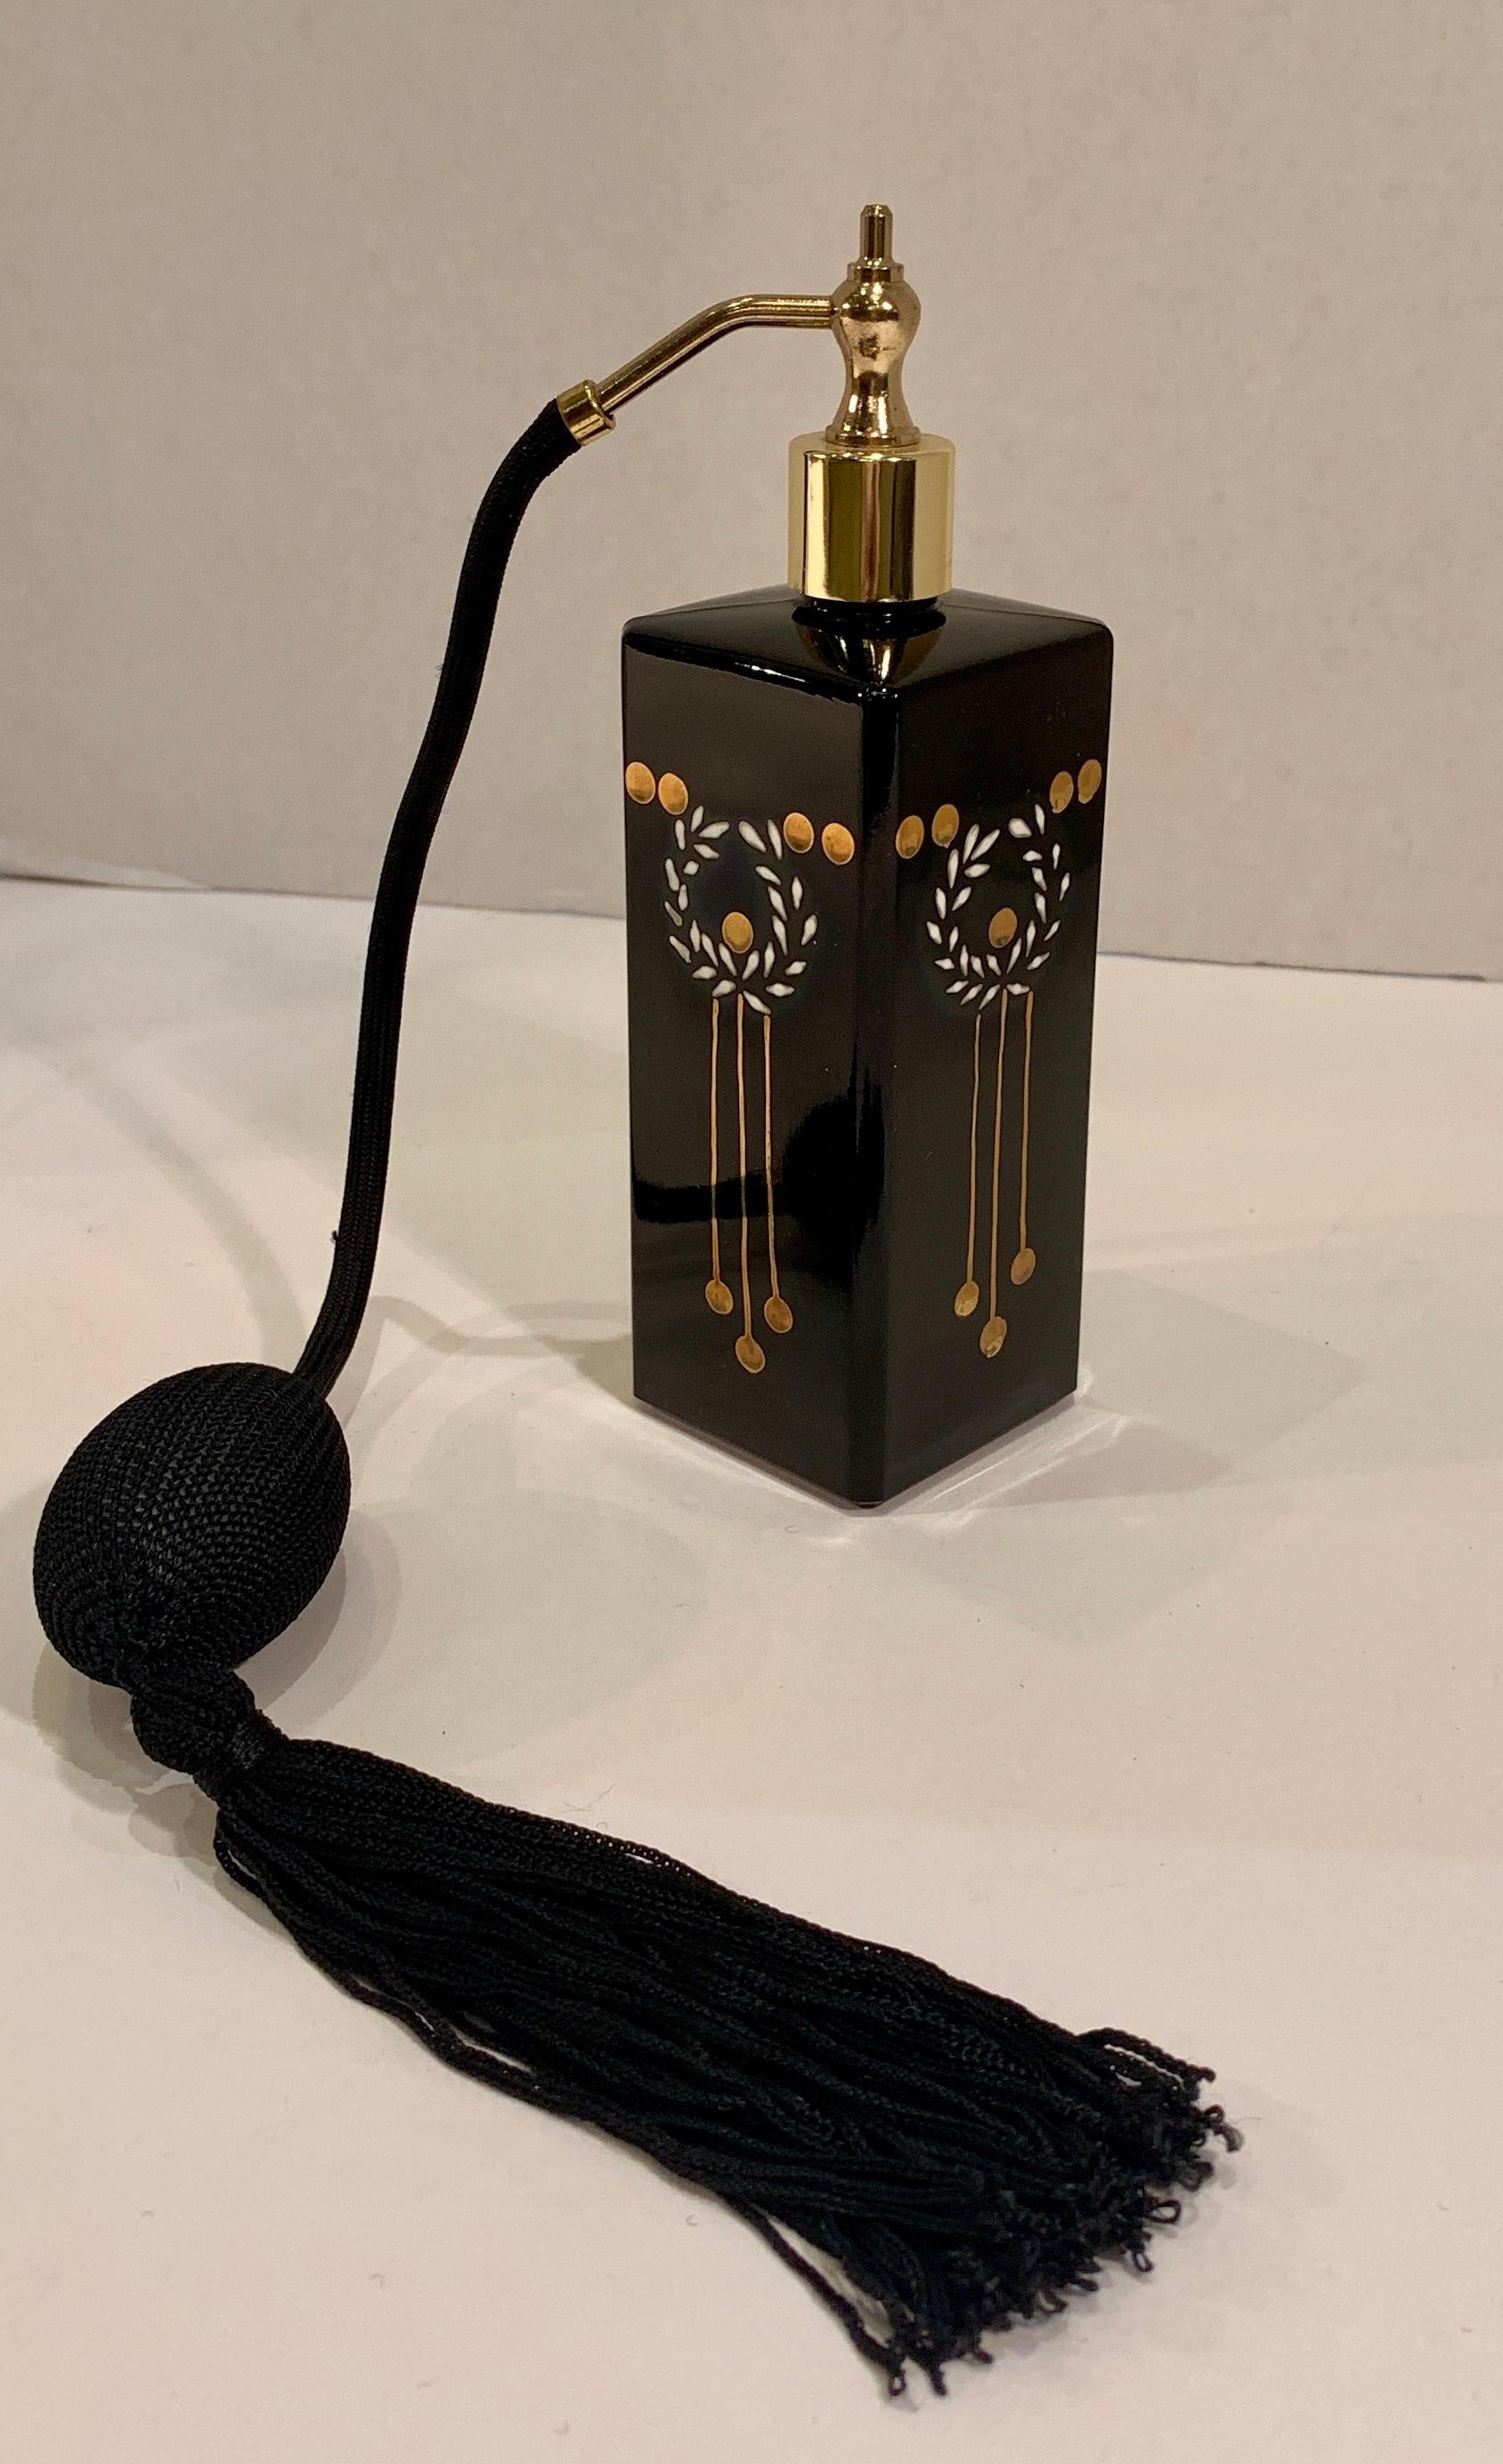 Chic, Hollywood Regency inspired, black glass perfume bottle with black atomizer and tassel features an unusual shape, square with cut corners, and a gold metal top. All four sides are hand painted in 24 karat gold and white with a laurel wreath